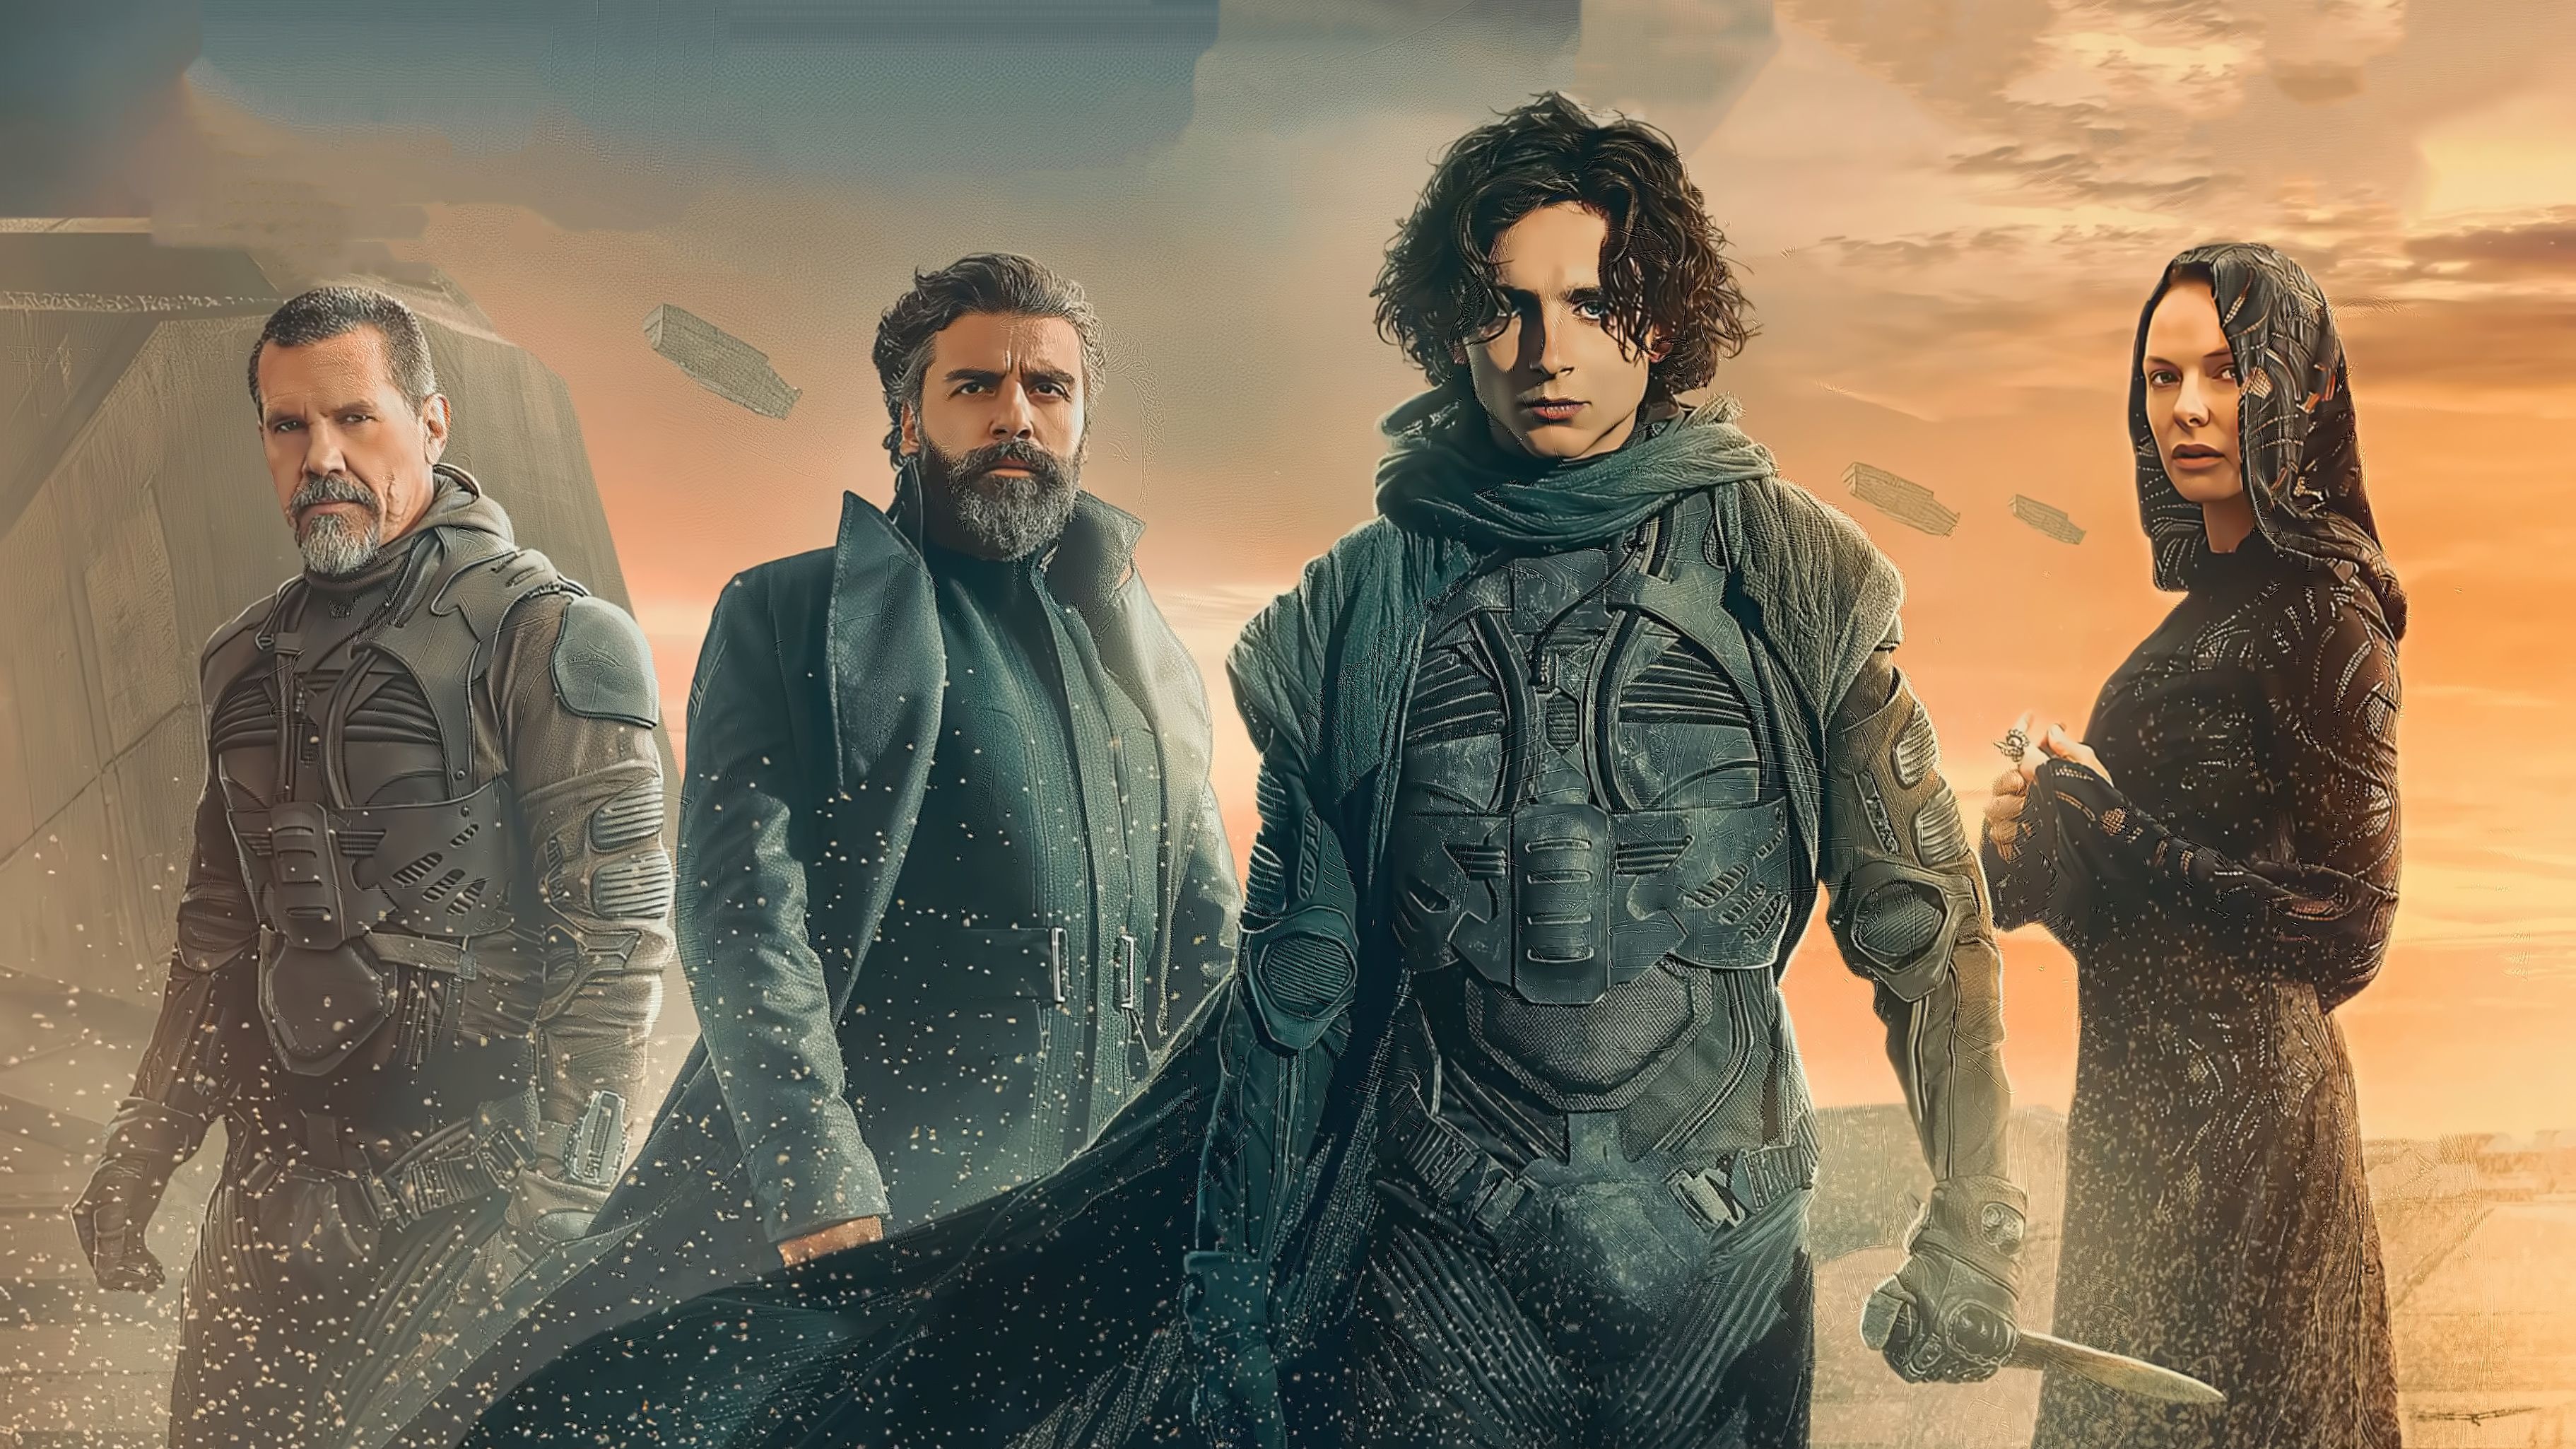 Poster of Dune 2020 Wallpaper, HD Movies 4K Wallpaper, Image, Photo and Background